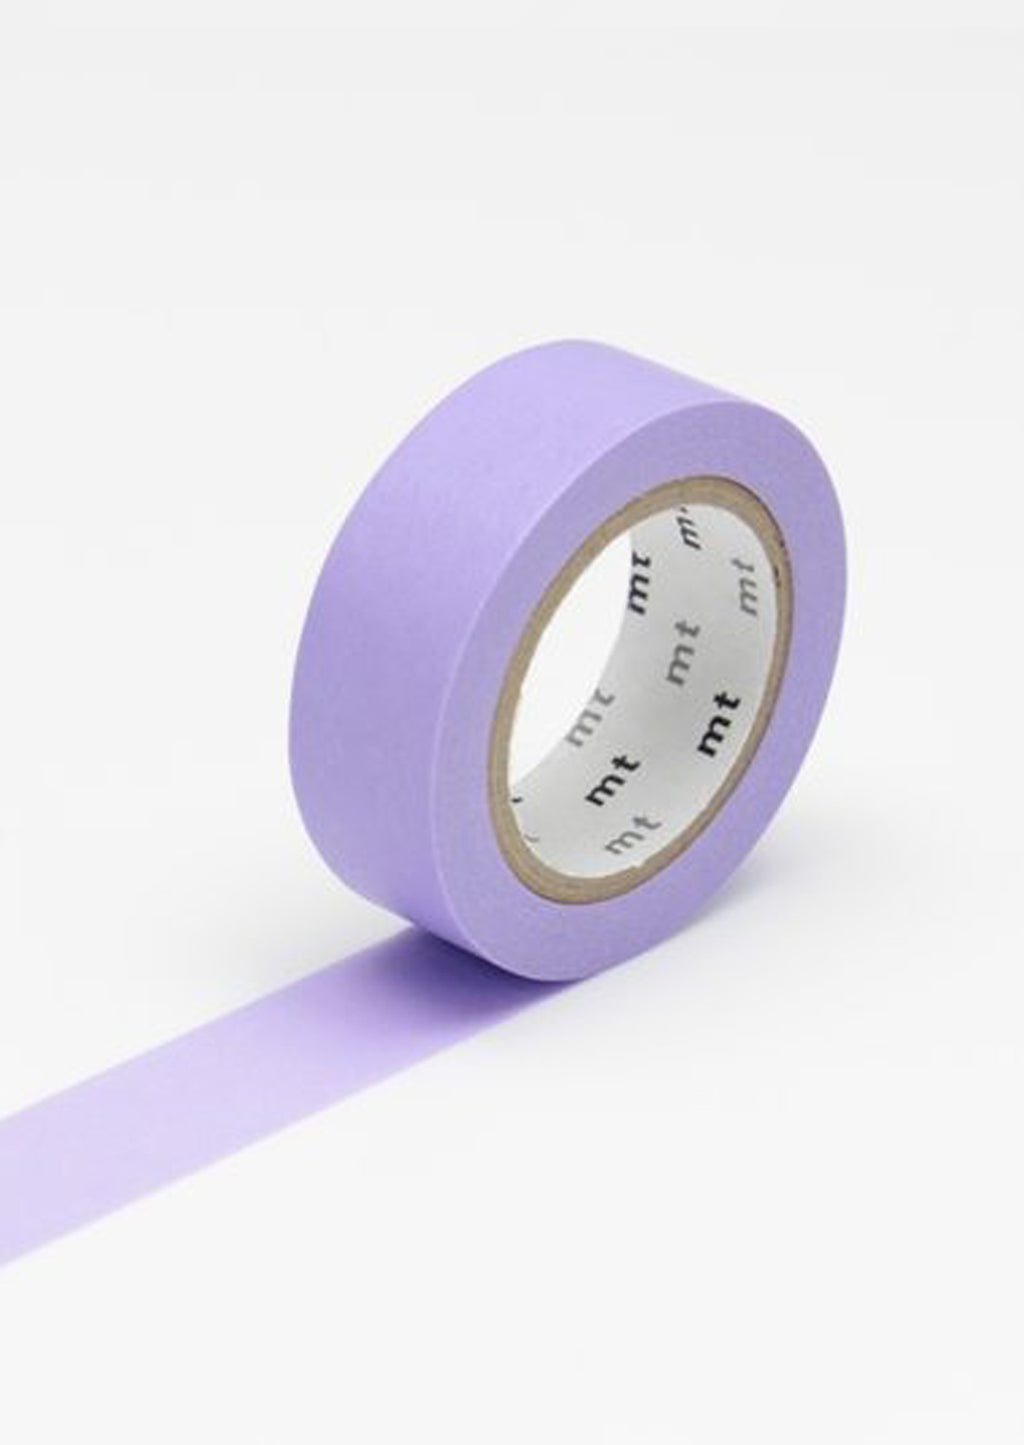 Hyacinth: A roll of washi tape in solid lavender color.